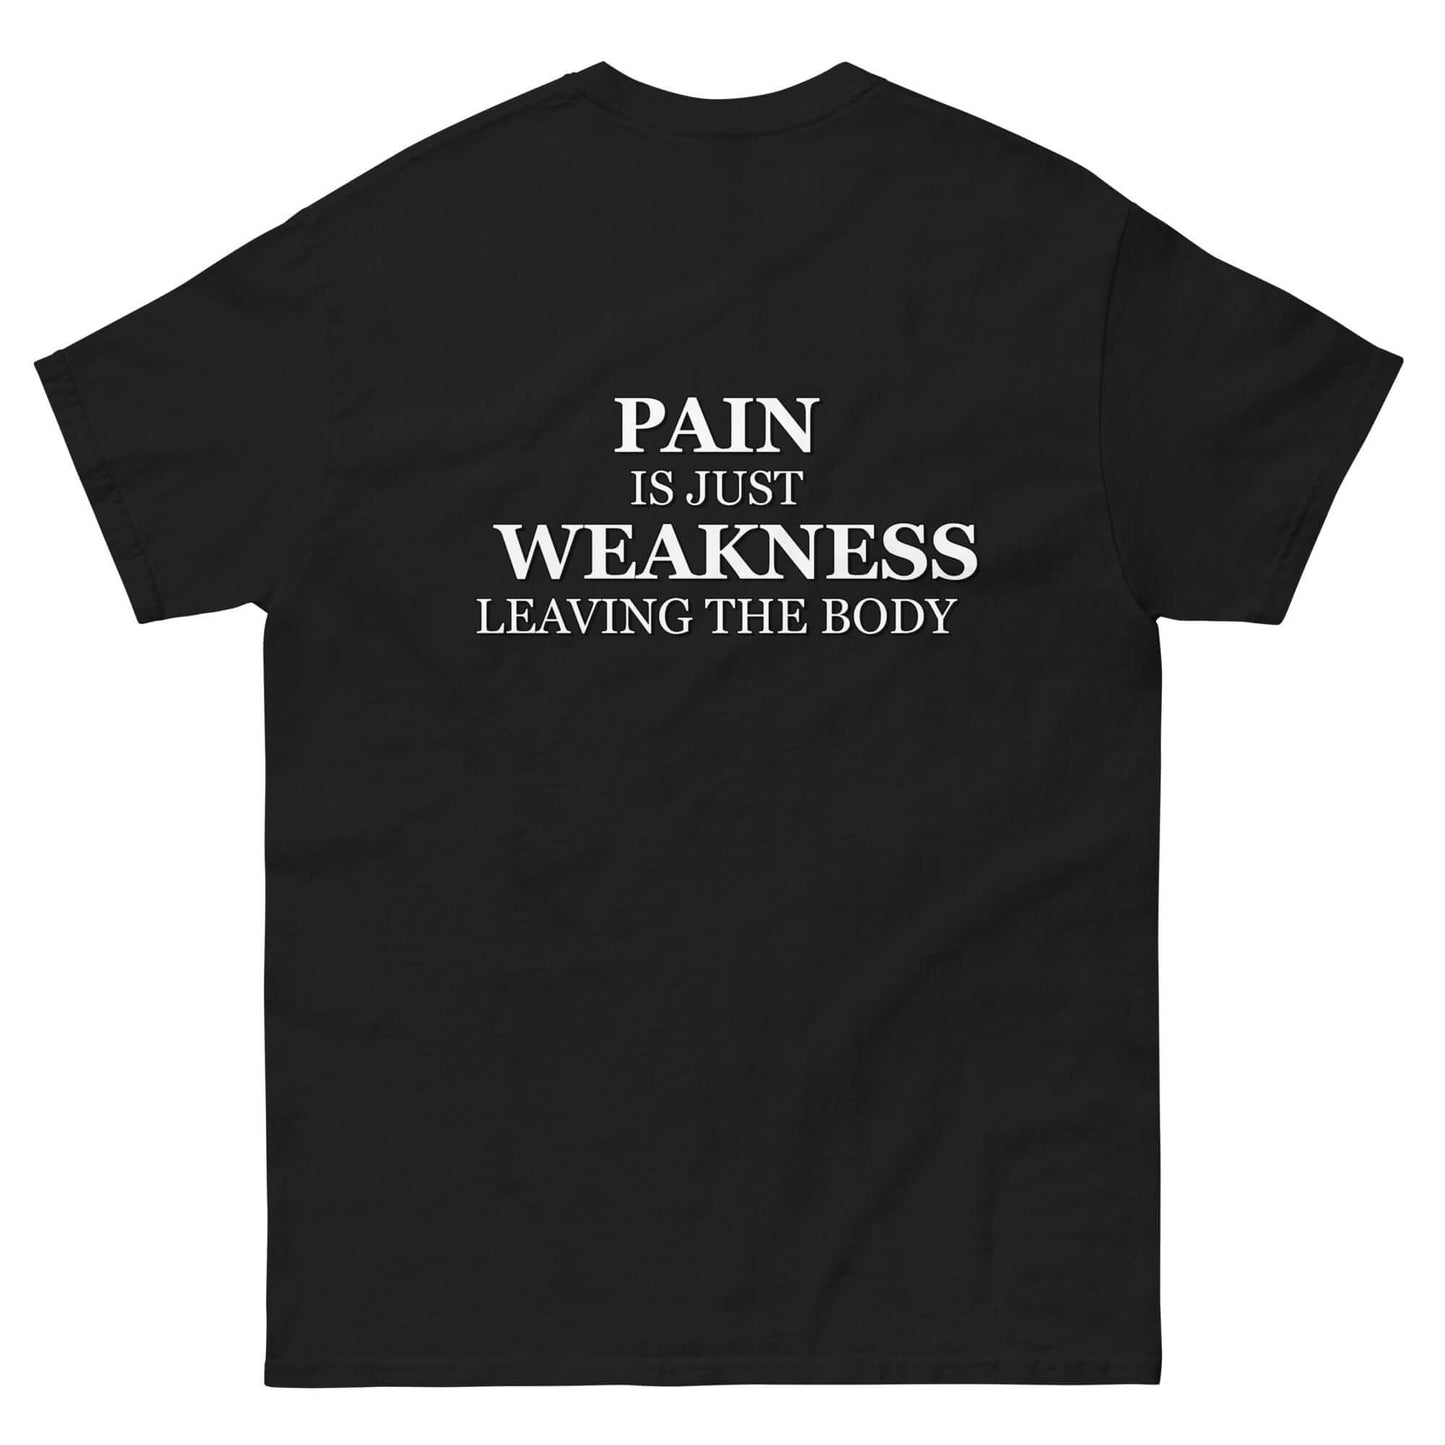 "Pain is just weakness..." - Classic T-Shirt